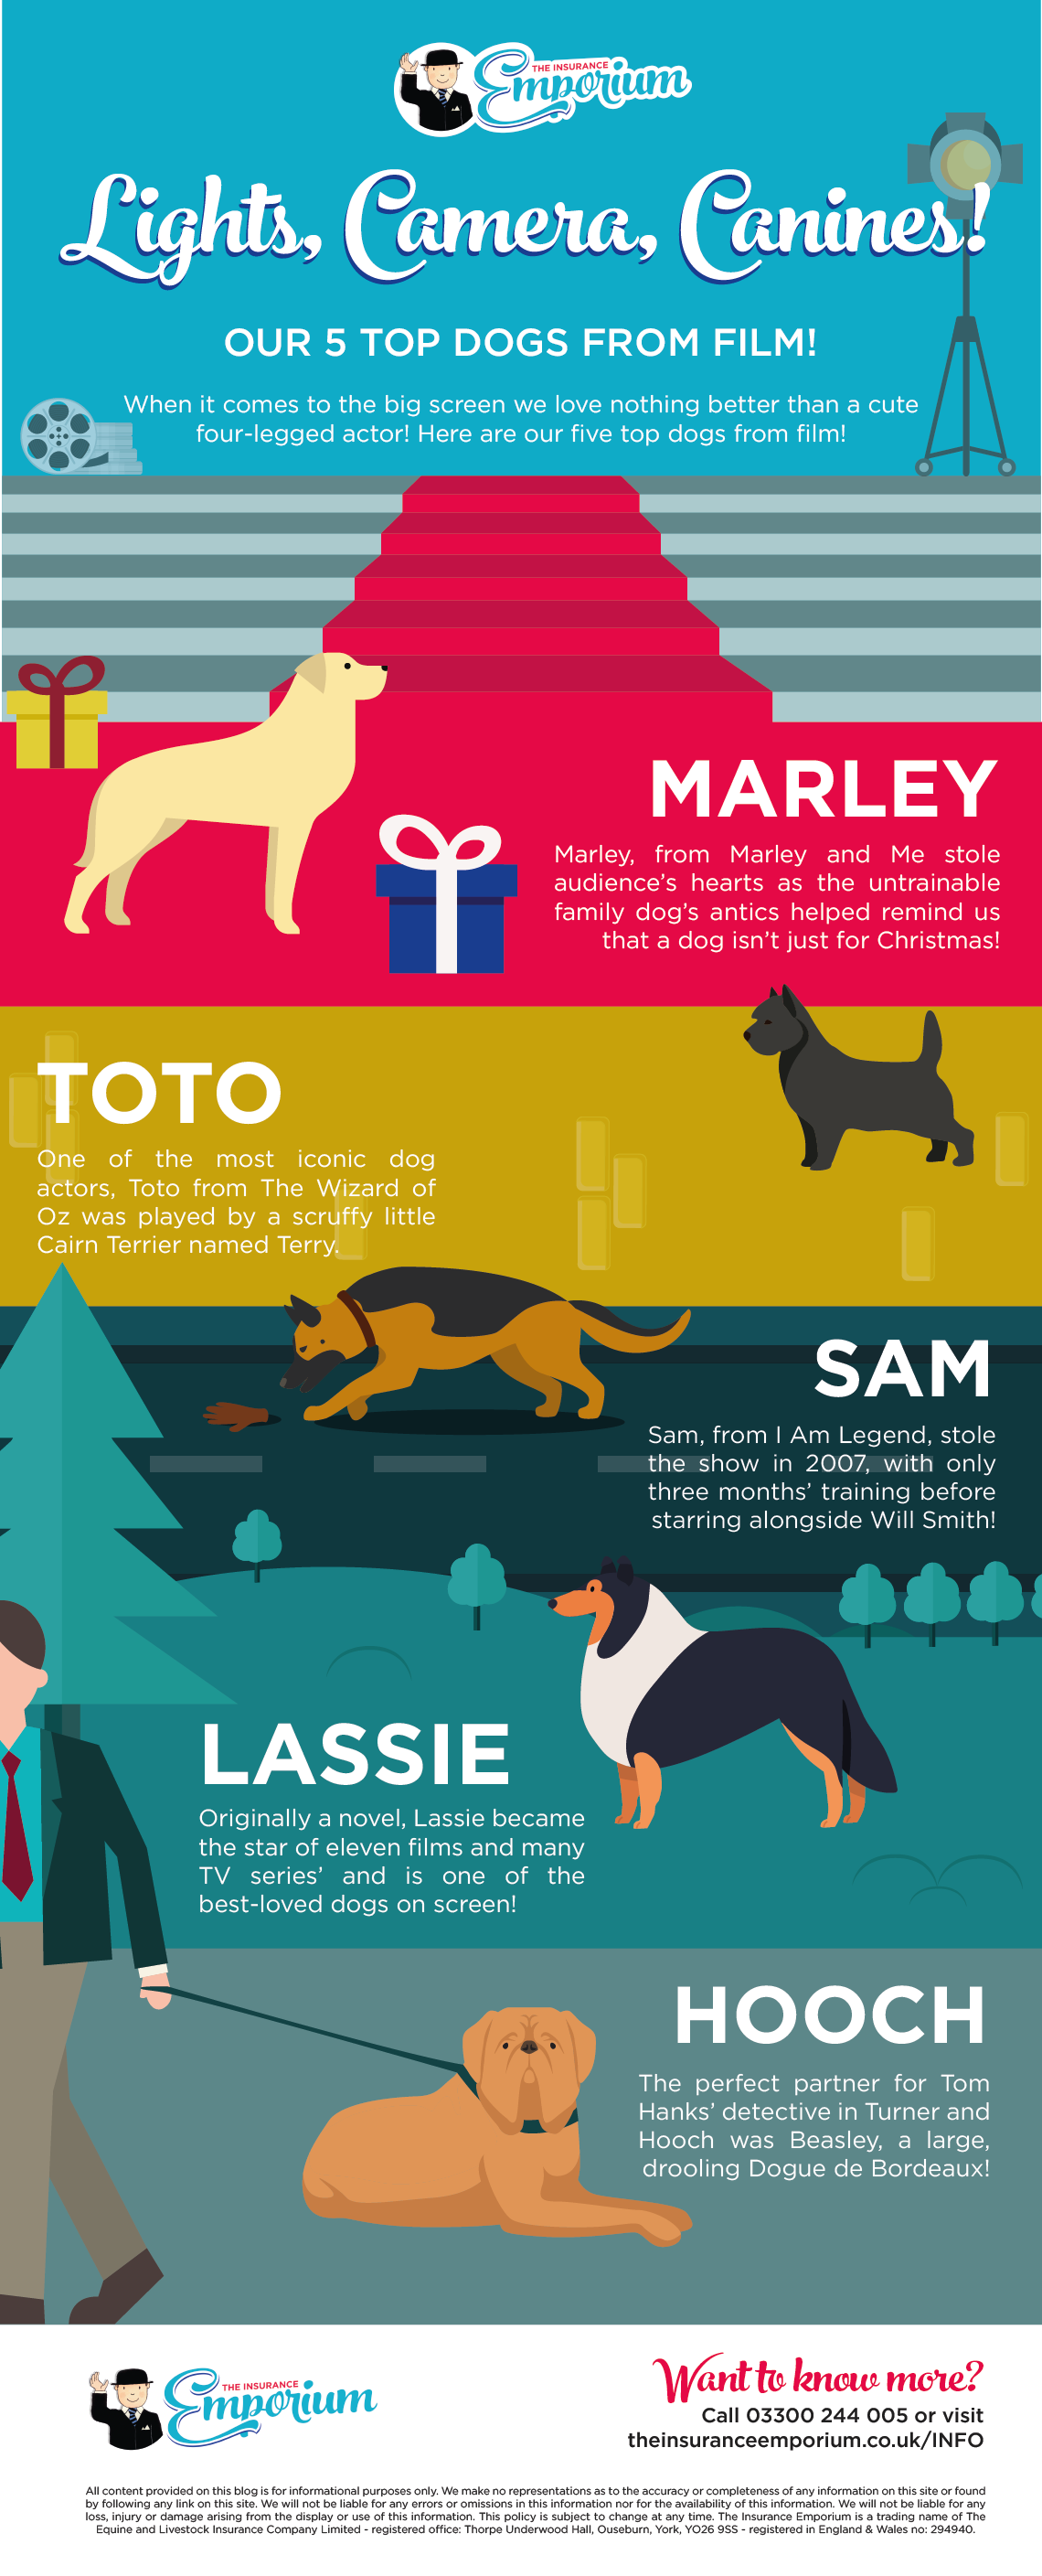 Lights, Camera, Canines! Our 5 Top Dogs from Film!

Infographic of famous dogs from film.